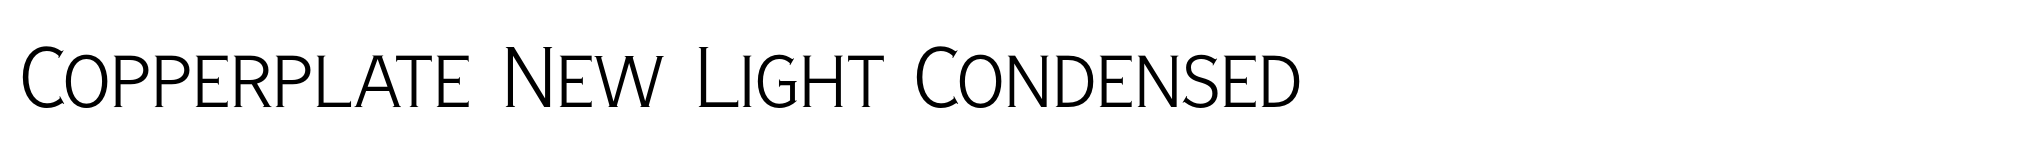 Copperplate New Light Condensed image